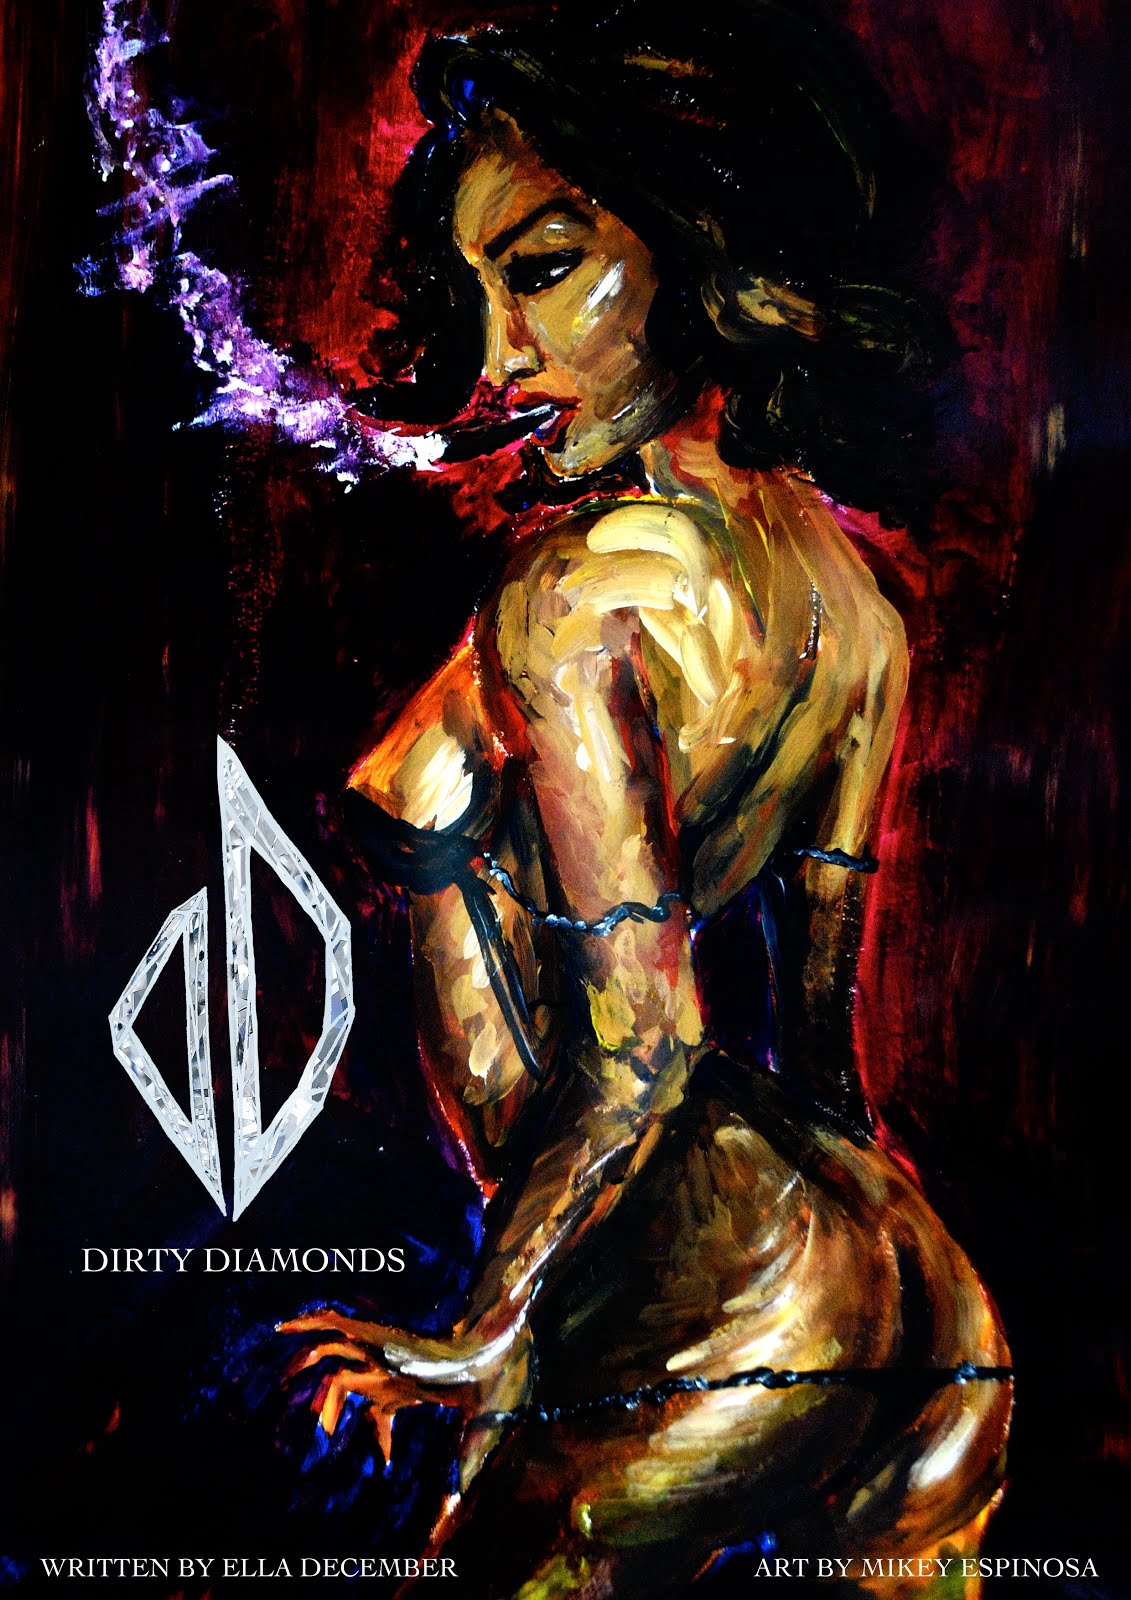 DIRTY DIAMONDS - ELLA DECEMBER (CLICK IMAGE TO PURCHASE BOOK)